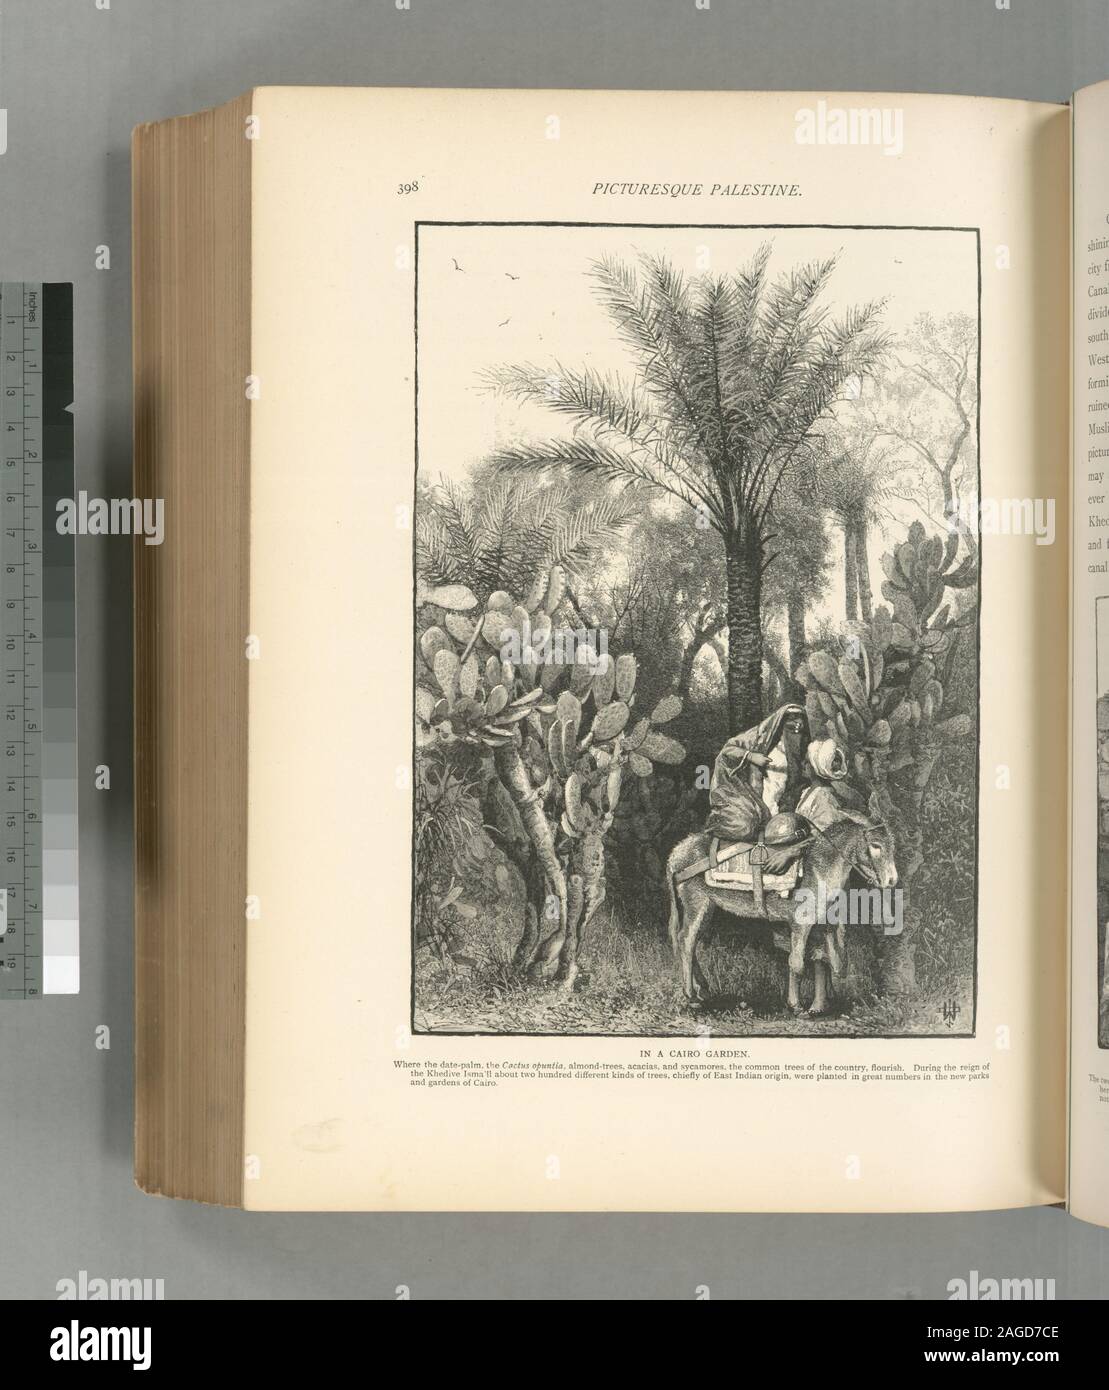 Colonel Wilson, ed.; In a Cairo garden.  Where the date-palm, the Cactus optunia, almond-trees, acacias, and sycamores, the common trees of the country, flourish.  During the reign of the Khedive Isma'îl about two hundred different kinds of trees, chiefly of East Indian origin, were planted in great numbers in the new parks and gardens of Cairo. Stock Photo